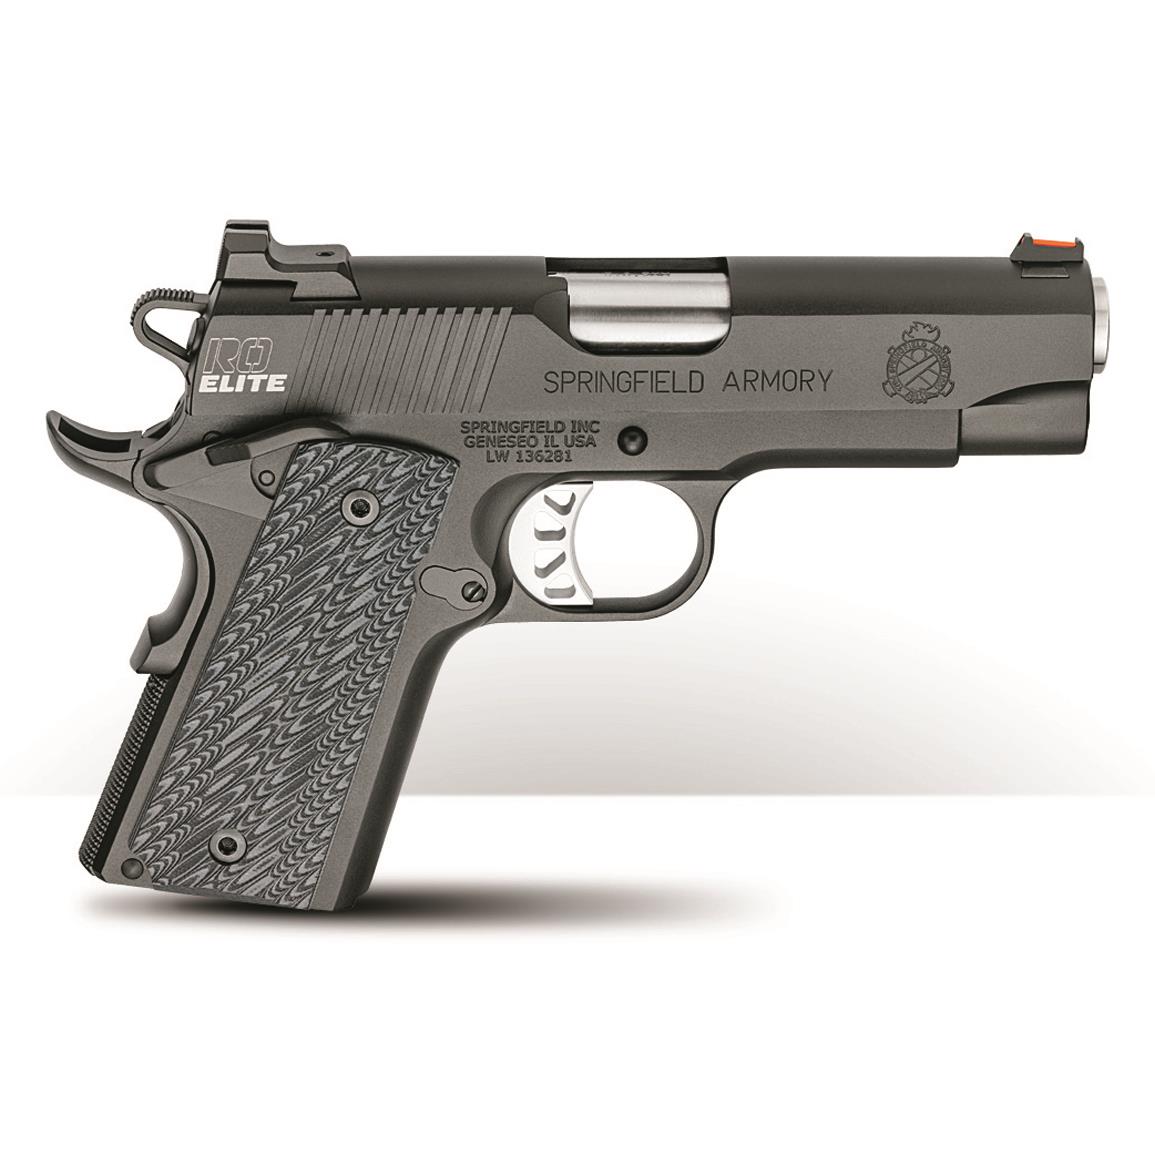 Springfield 1911 Range Officer Elite Compact, Semi-Automatic, 9mm, 4" Barrel, 8+1 Rounds